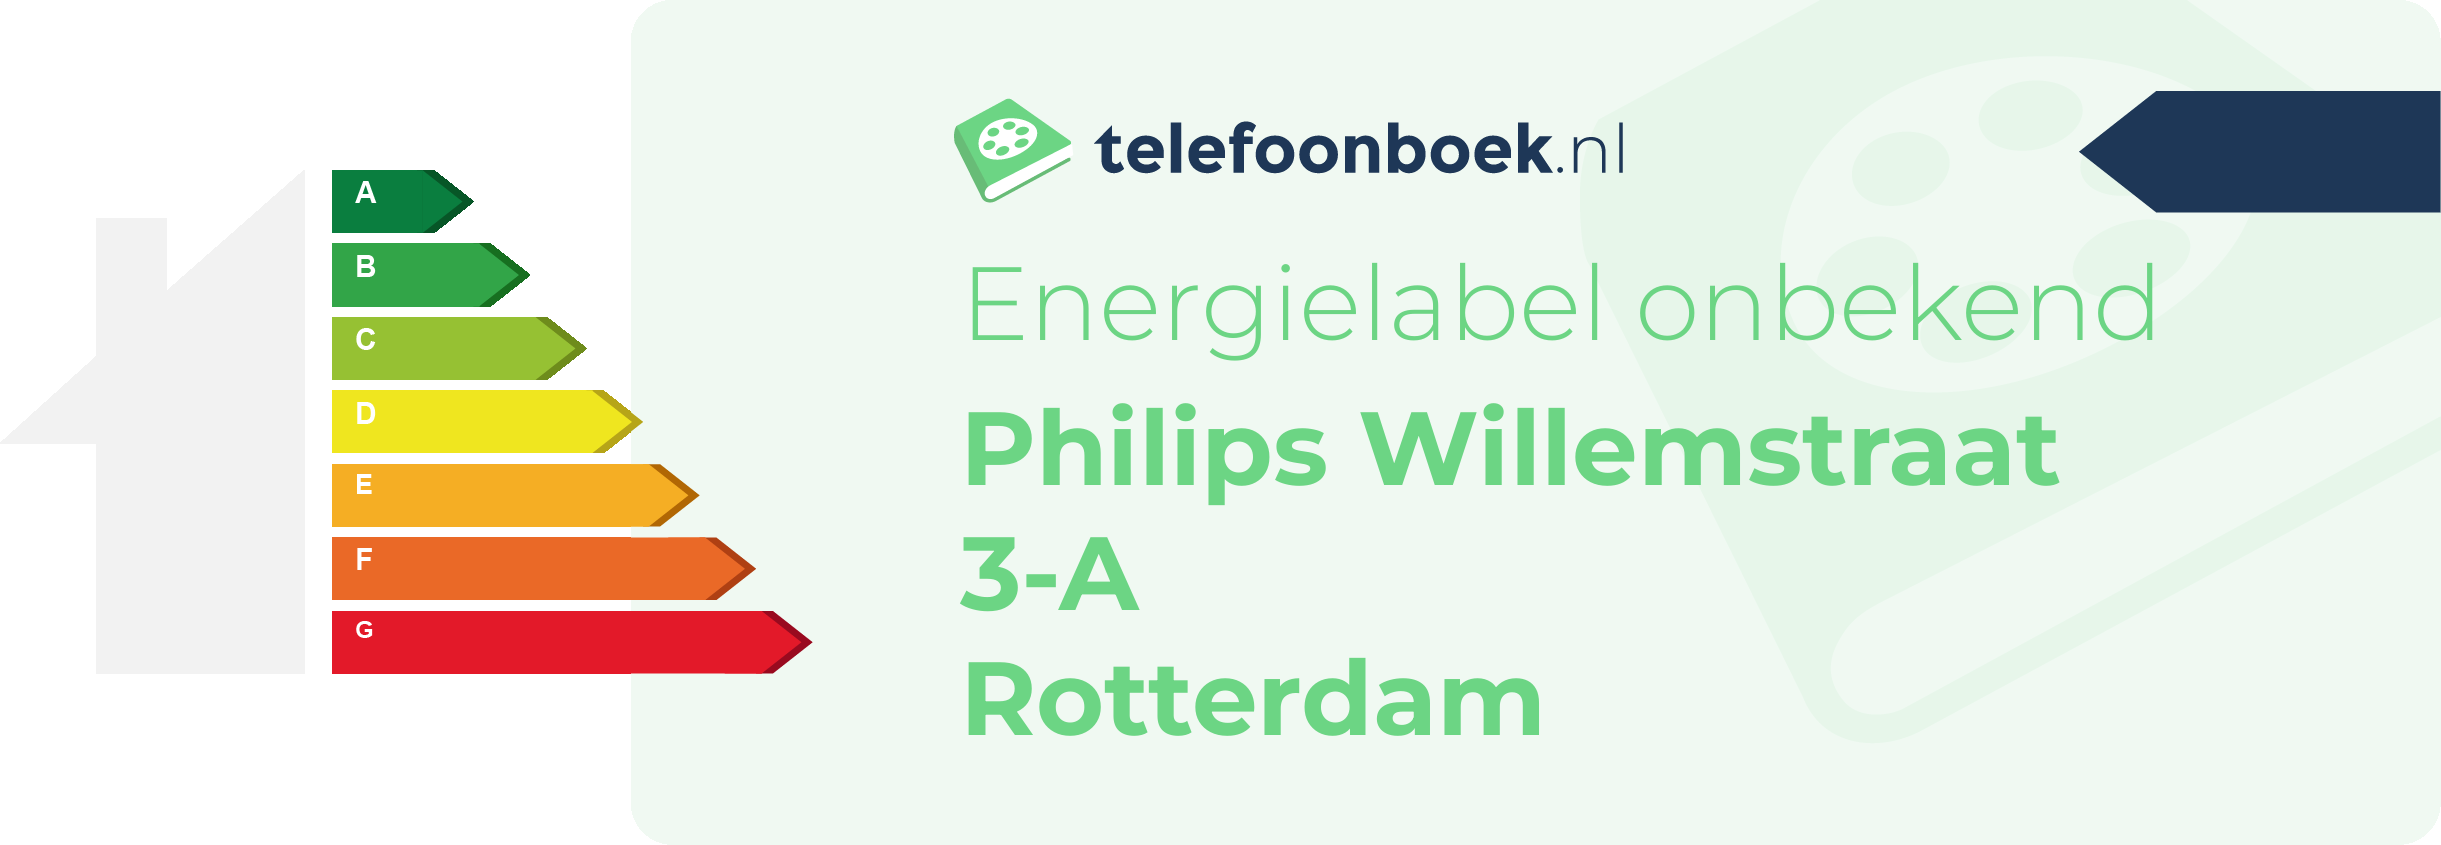 Energielabel Philips Willemstraat 3-A Rotterdam